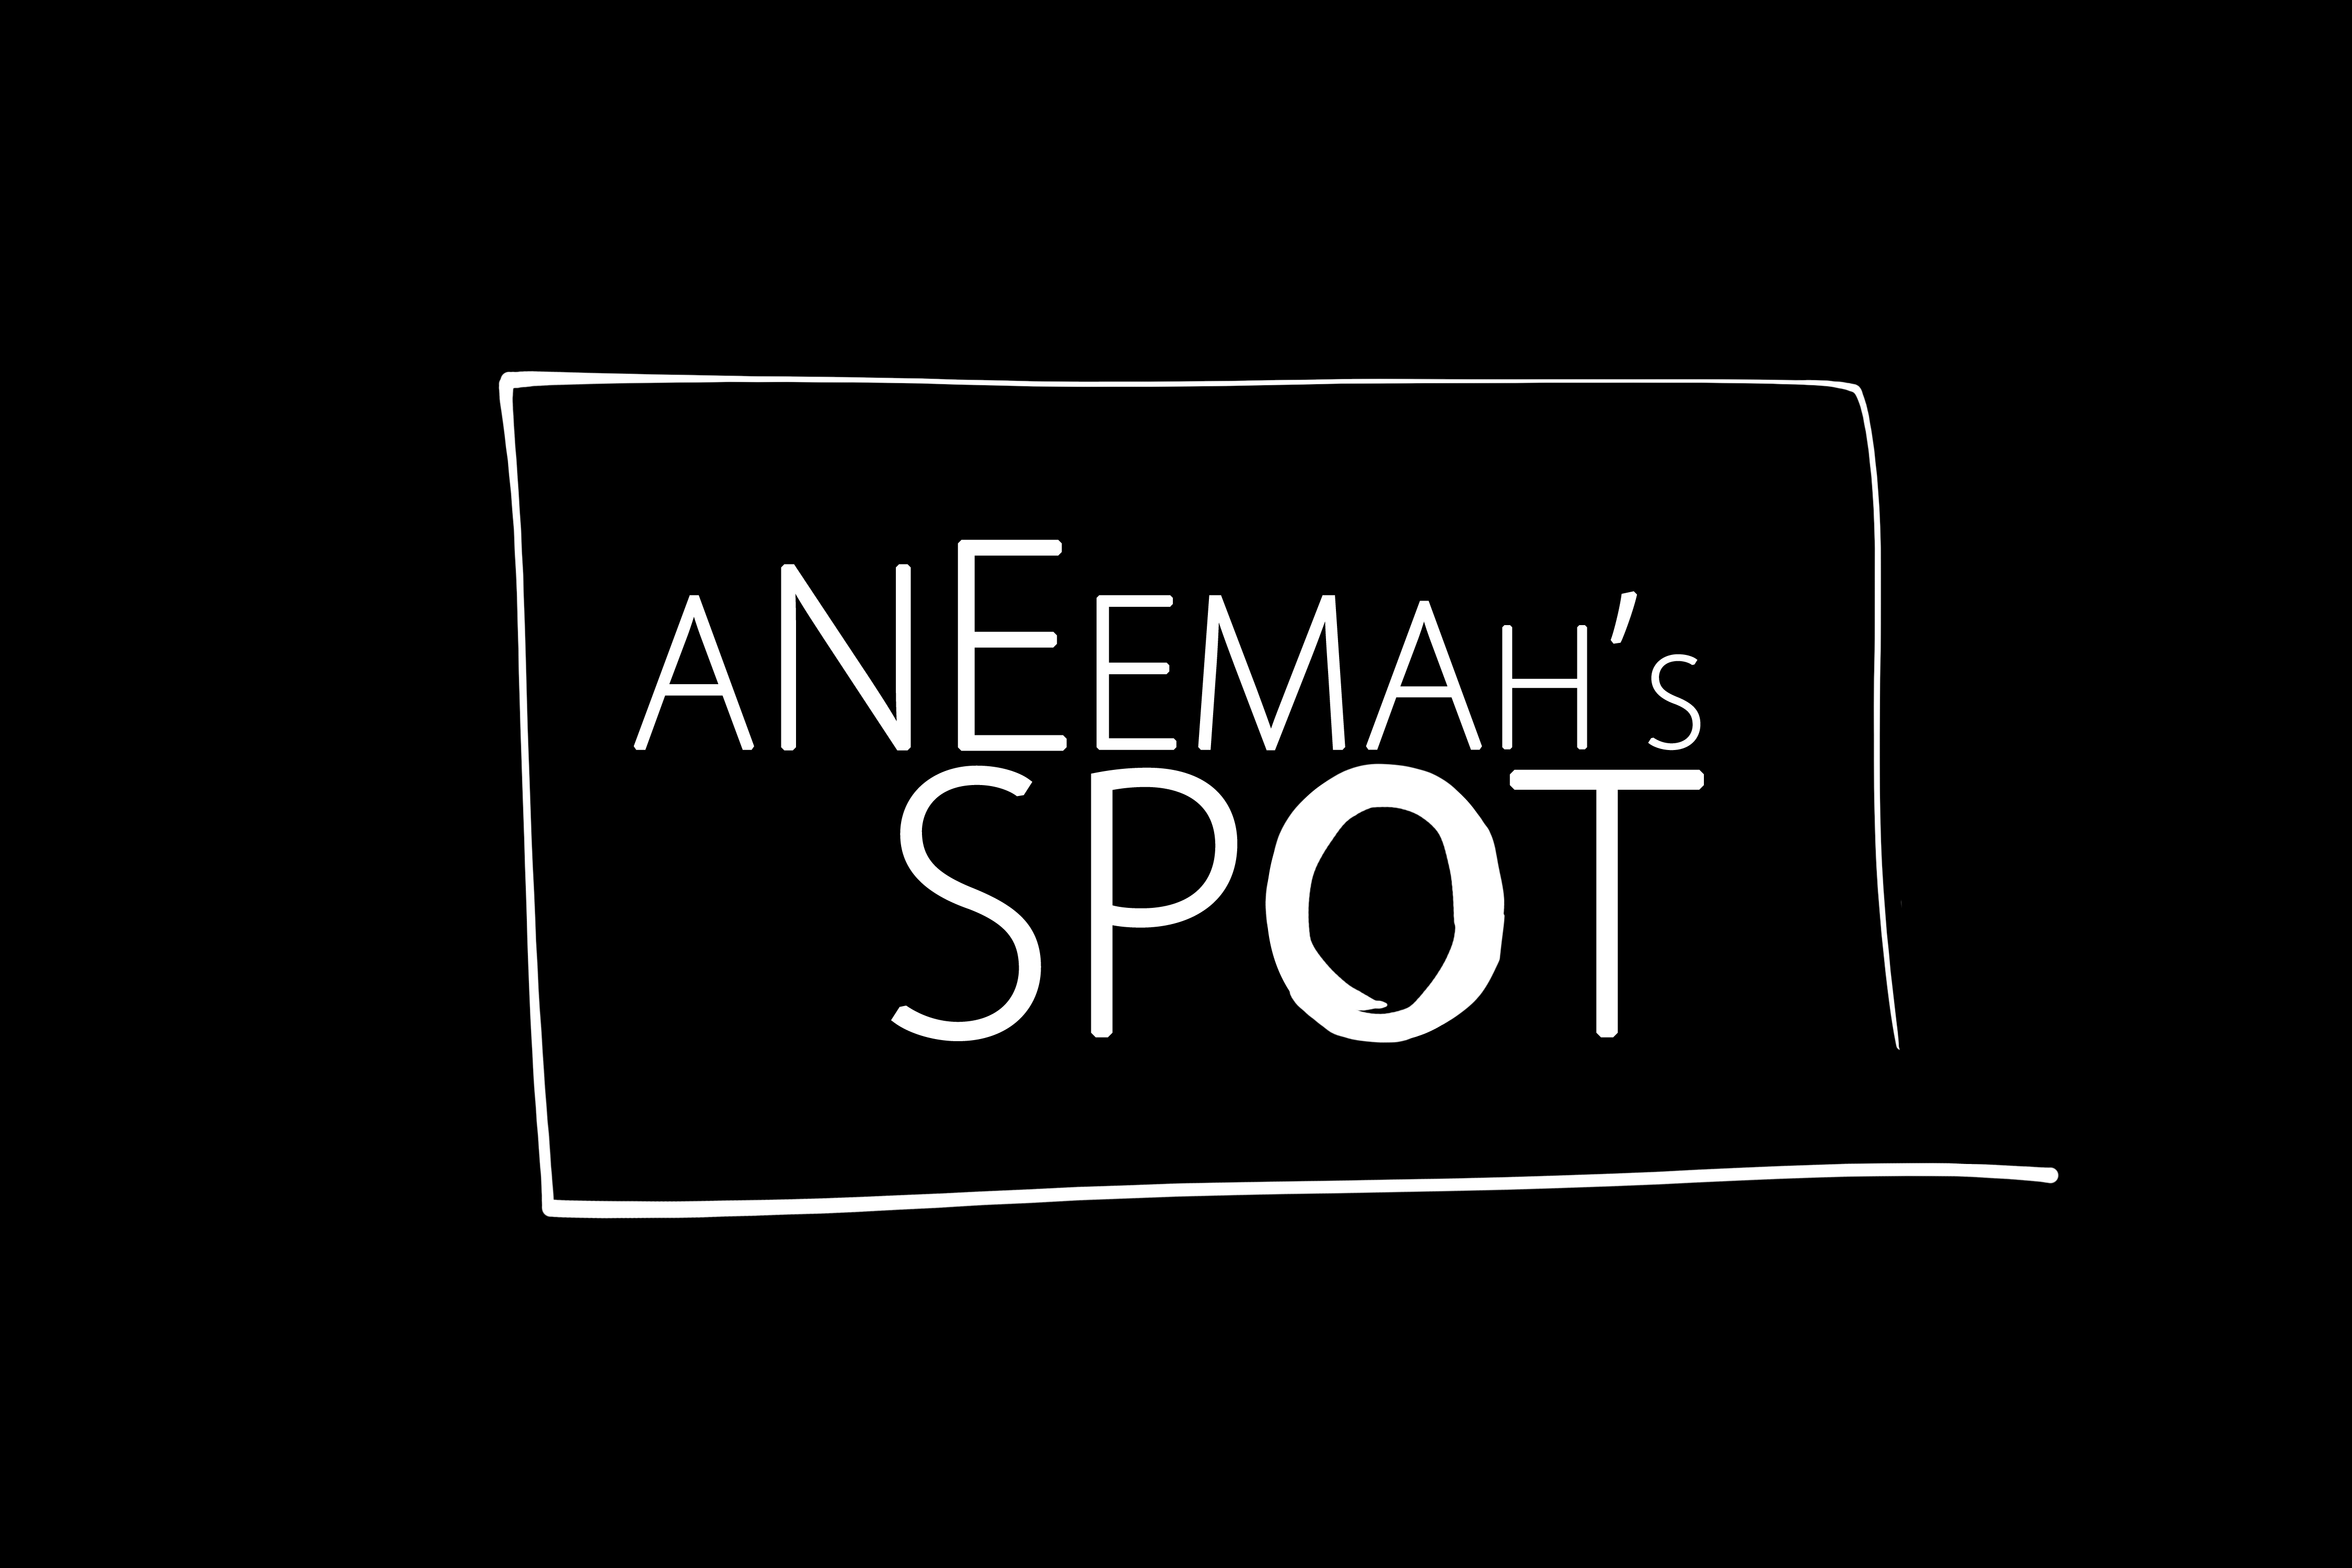 Aneemahs-Spot_title.png